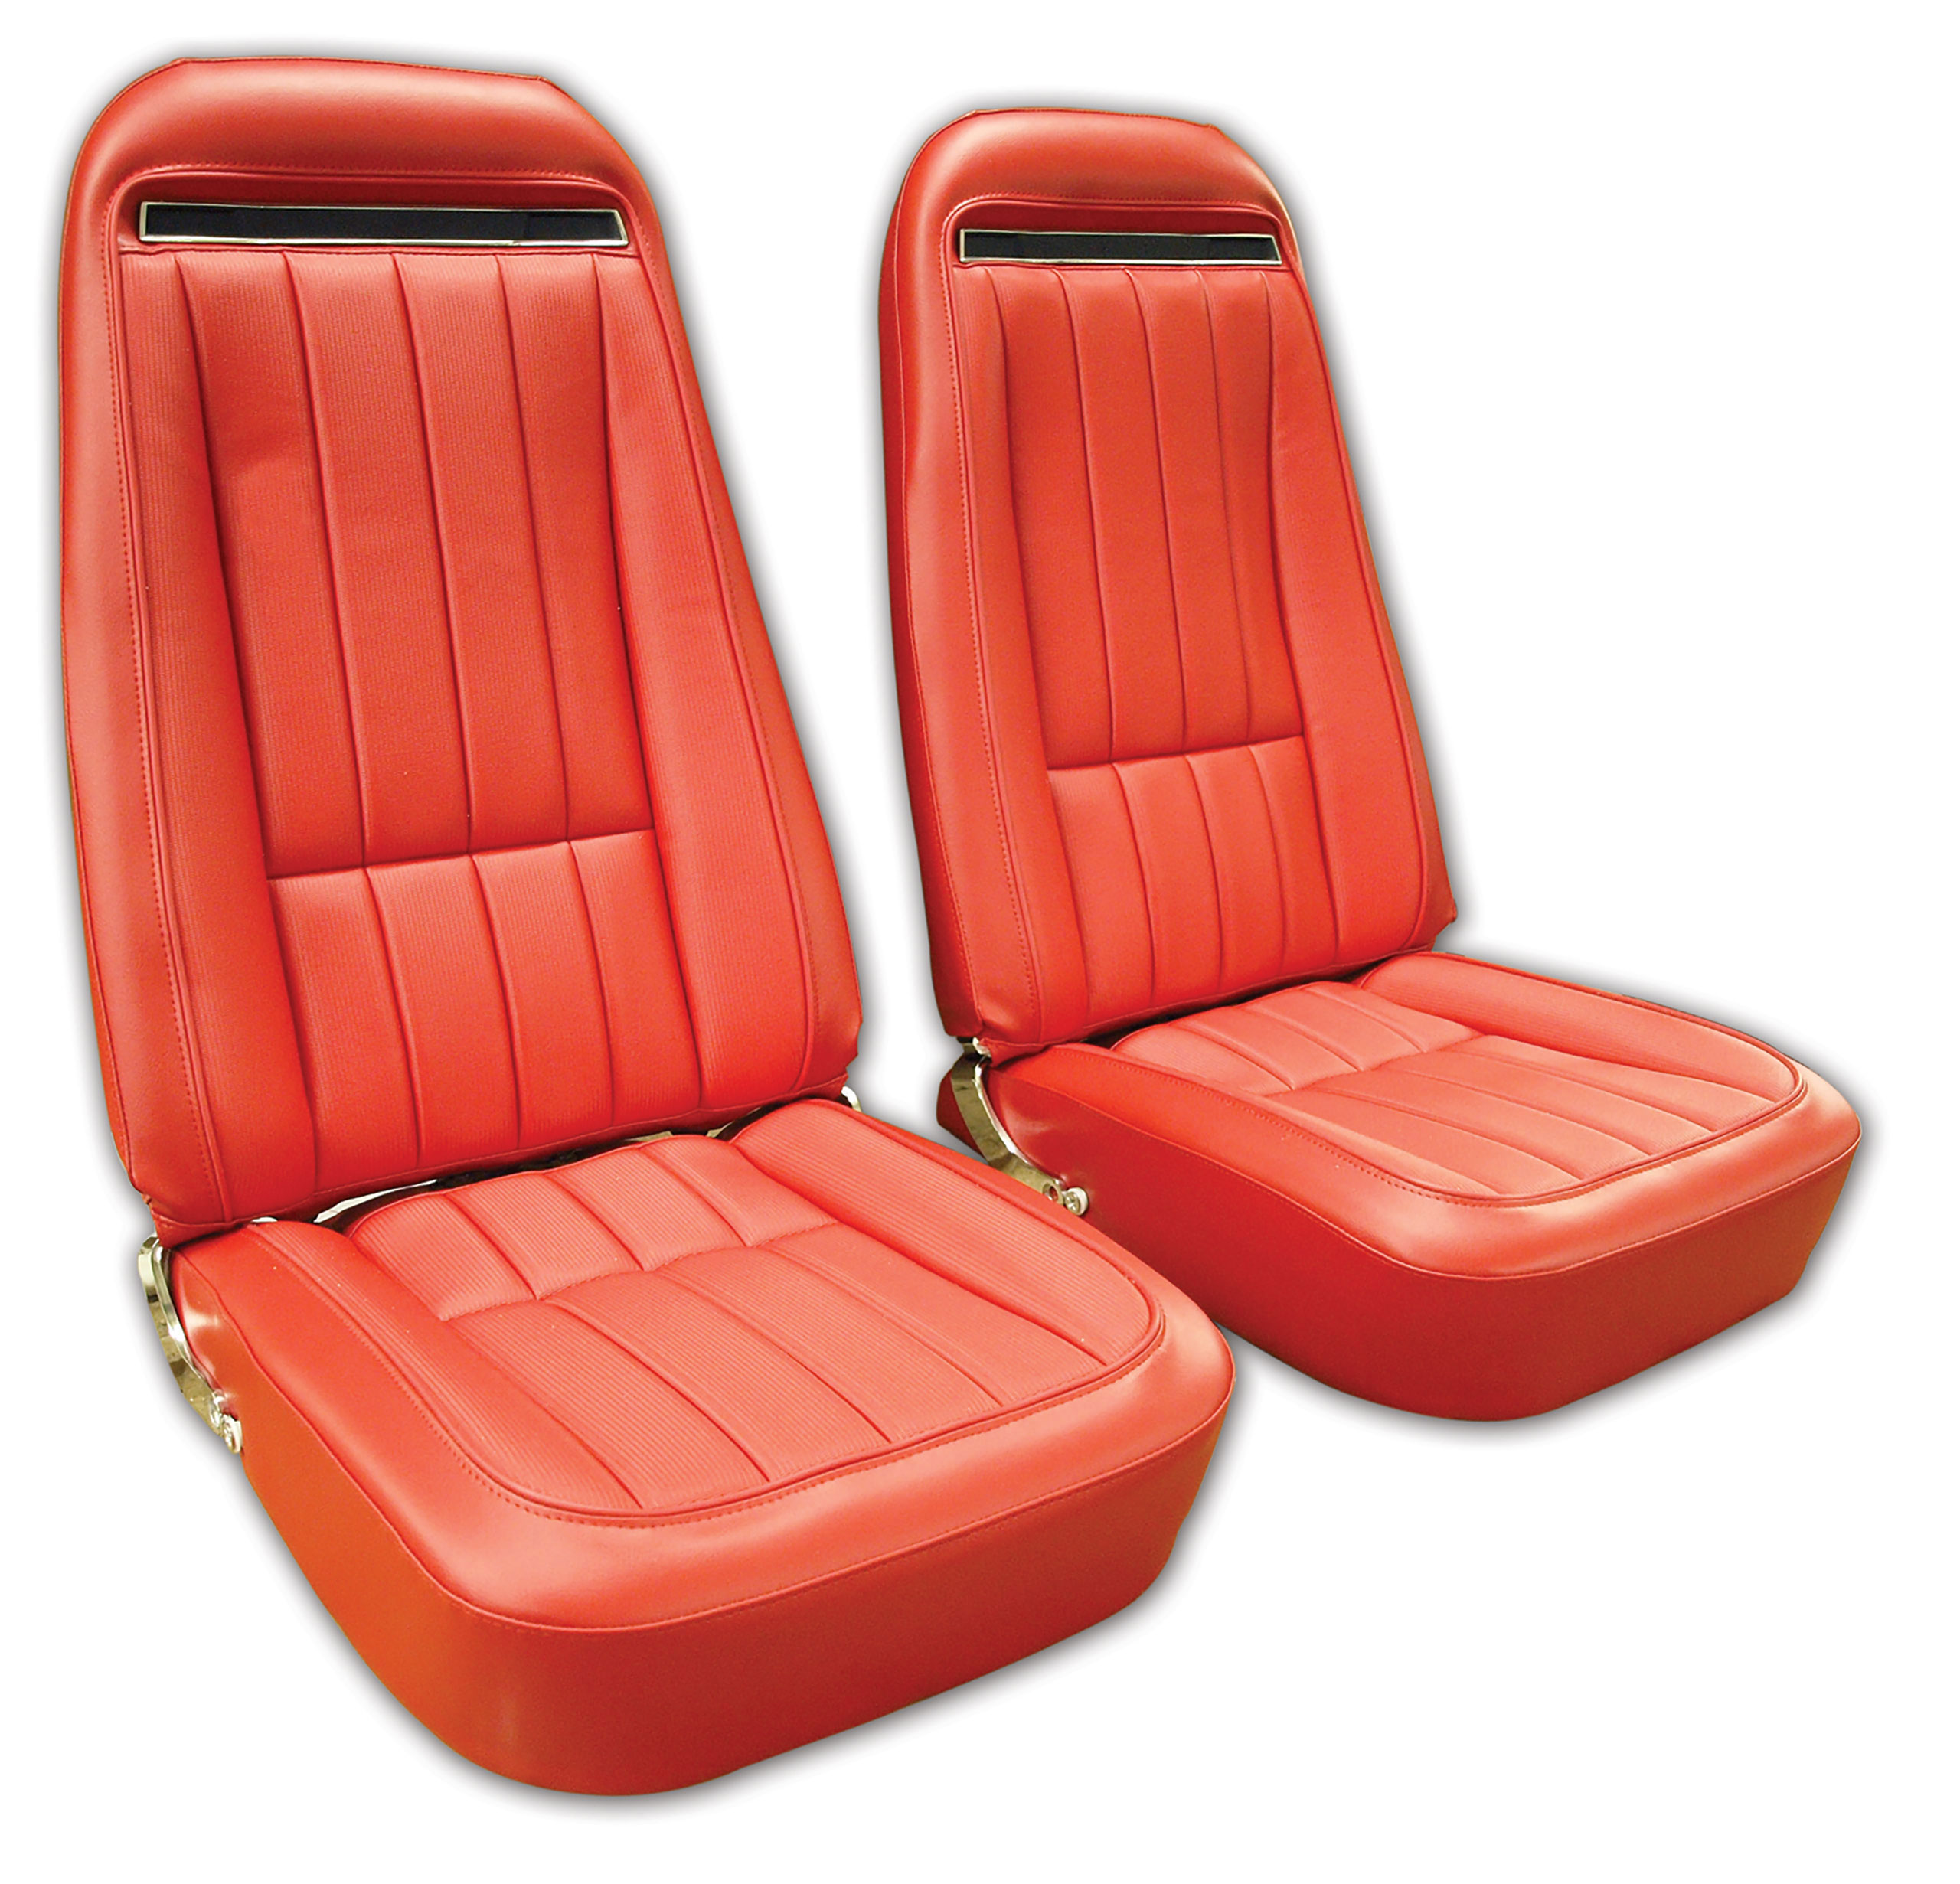 1970-1971 C3 Corvette Mounted Seats Red "Leather-Like" Vinyl Without Shoulder Harness